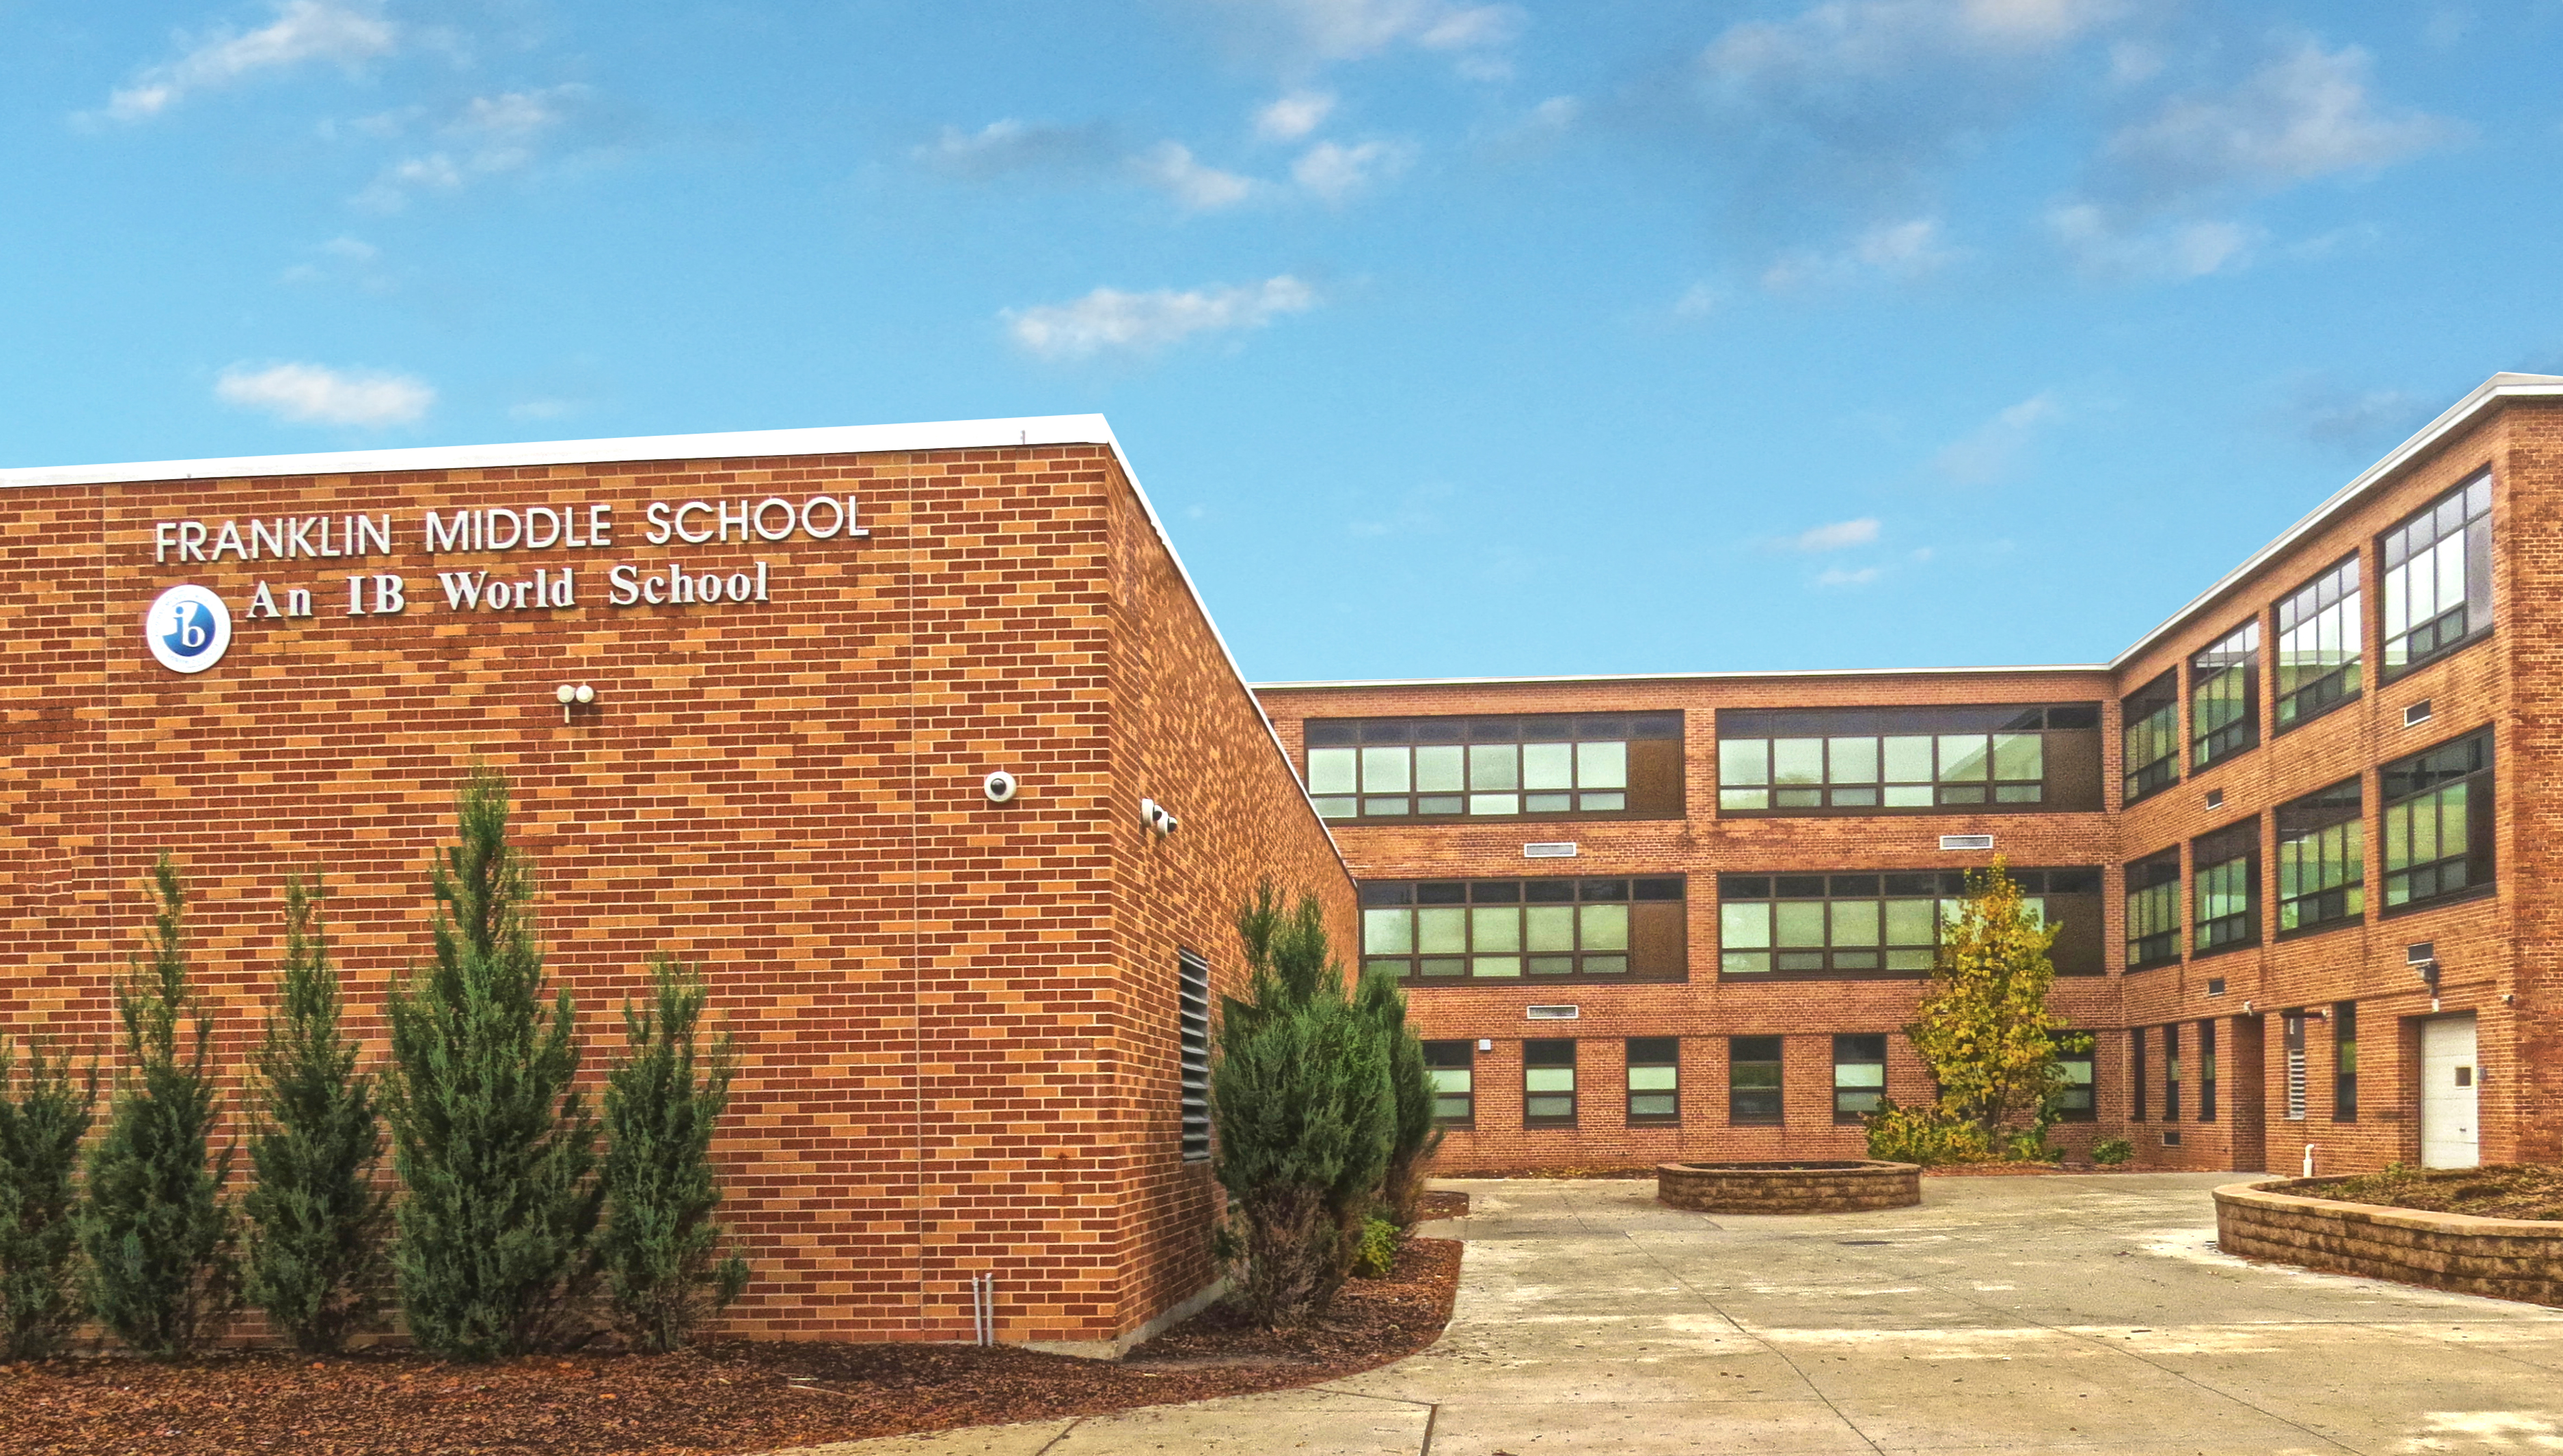 Education - K-12 - Wausau Window and Wall Systems